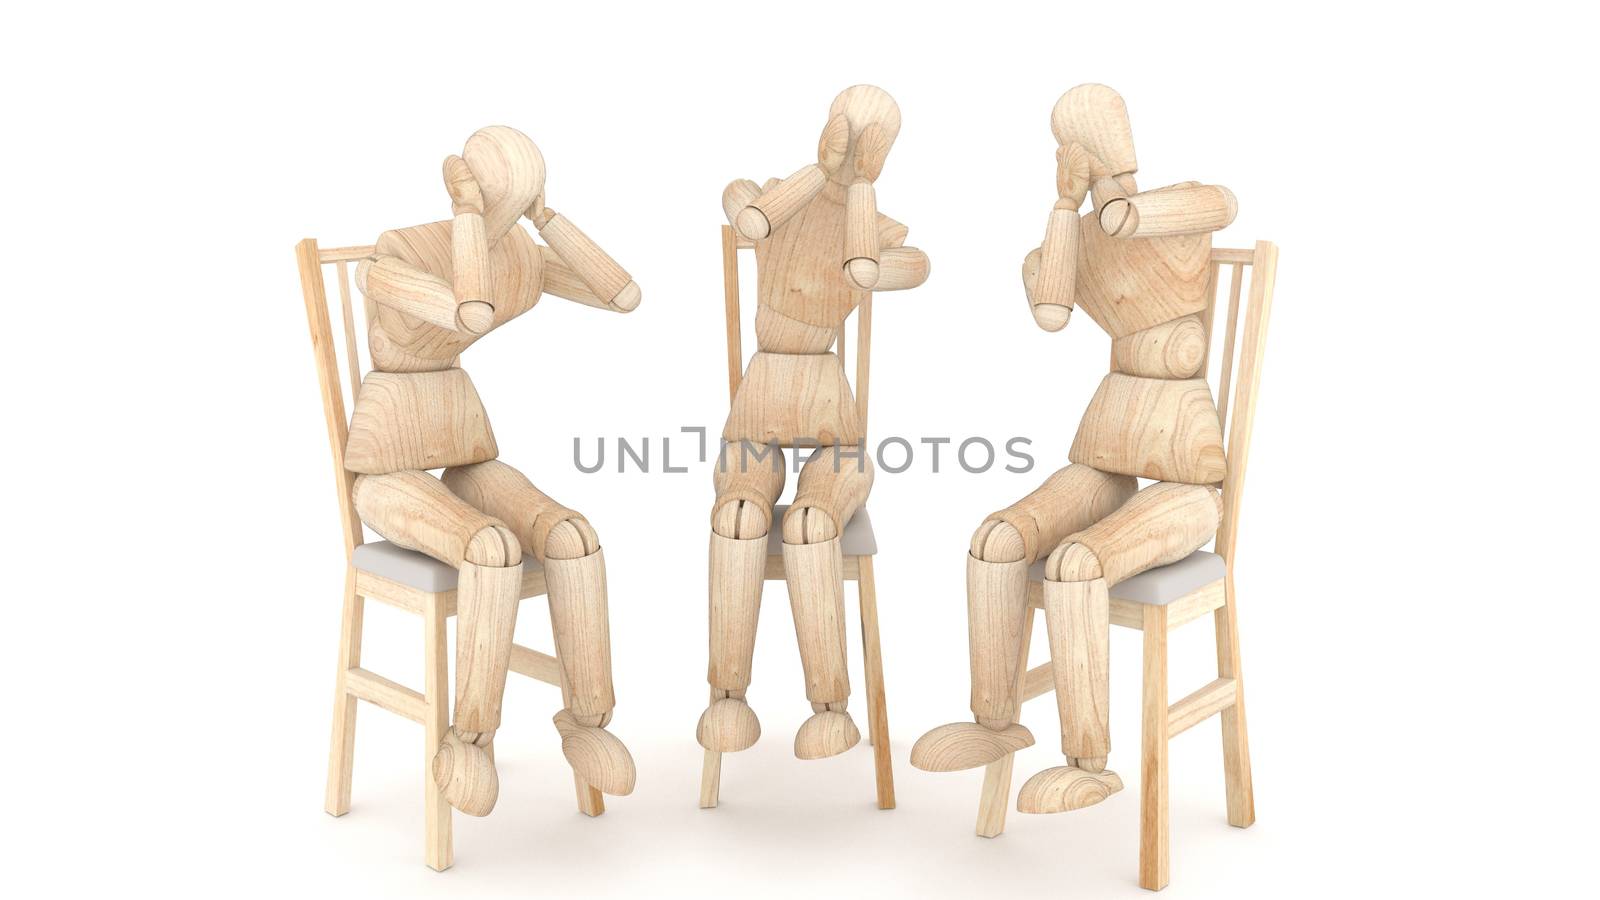 Three wooden puppets. 3D rendering